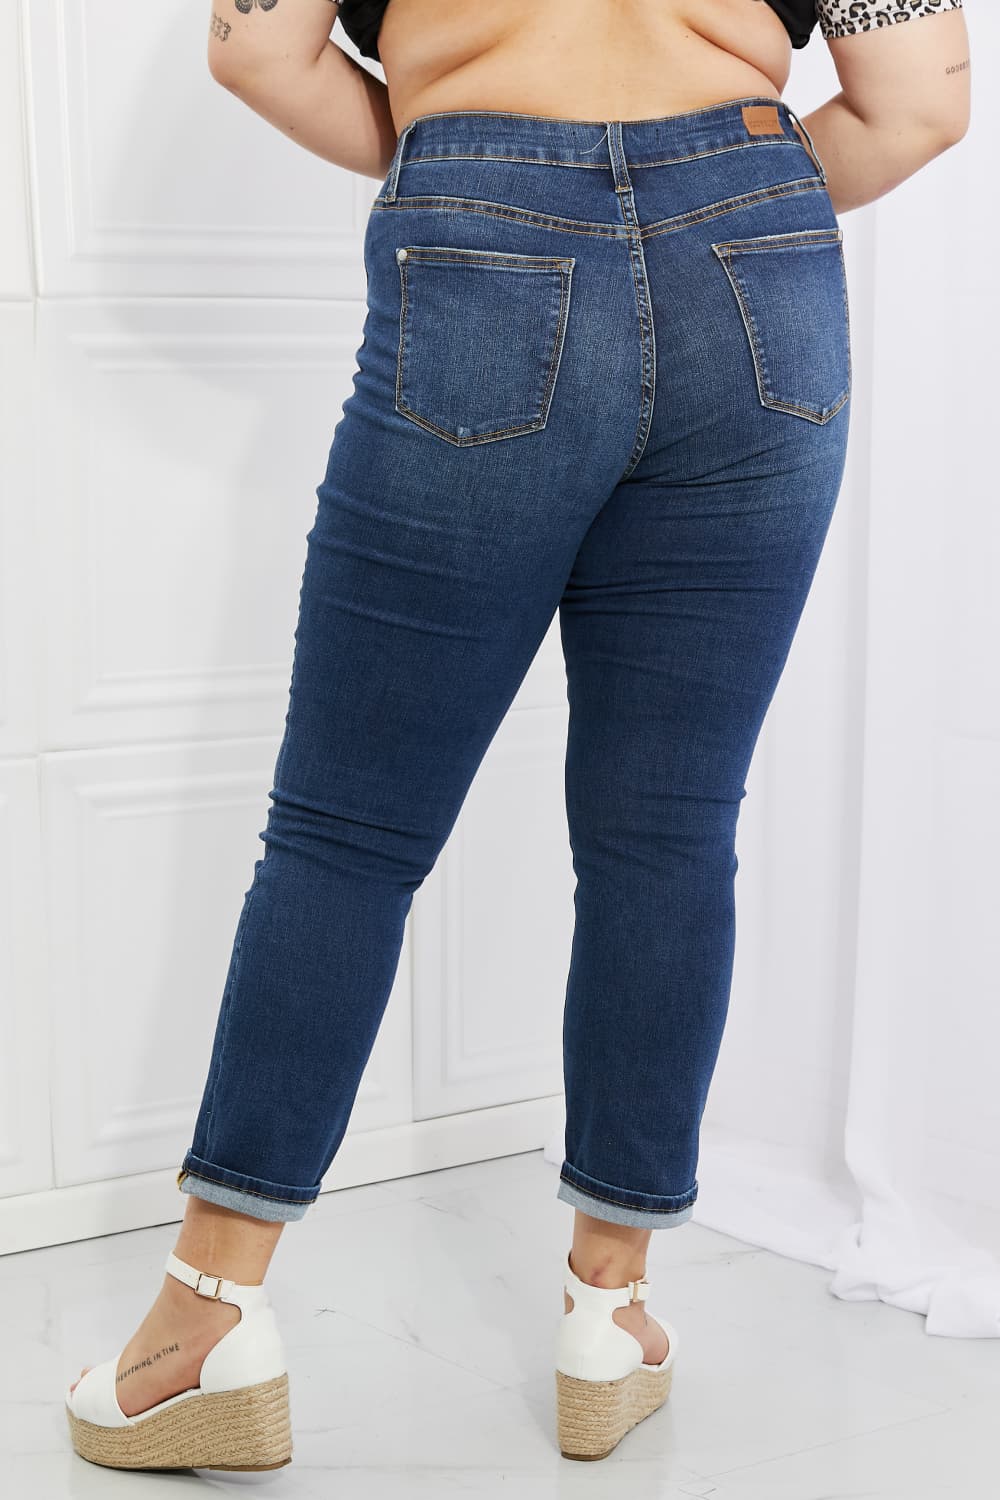 Back View, Plus Size, Judy Blue, High-Rise Sustainable Cool Denim Cuffed Boyfriend Jeans Style 88608